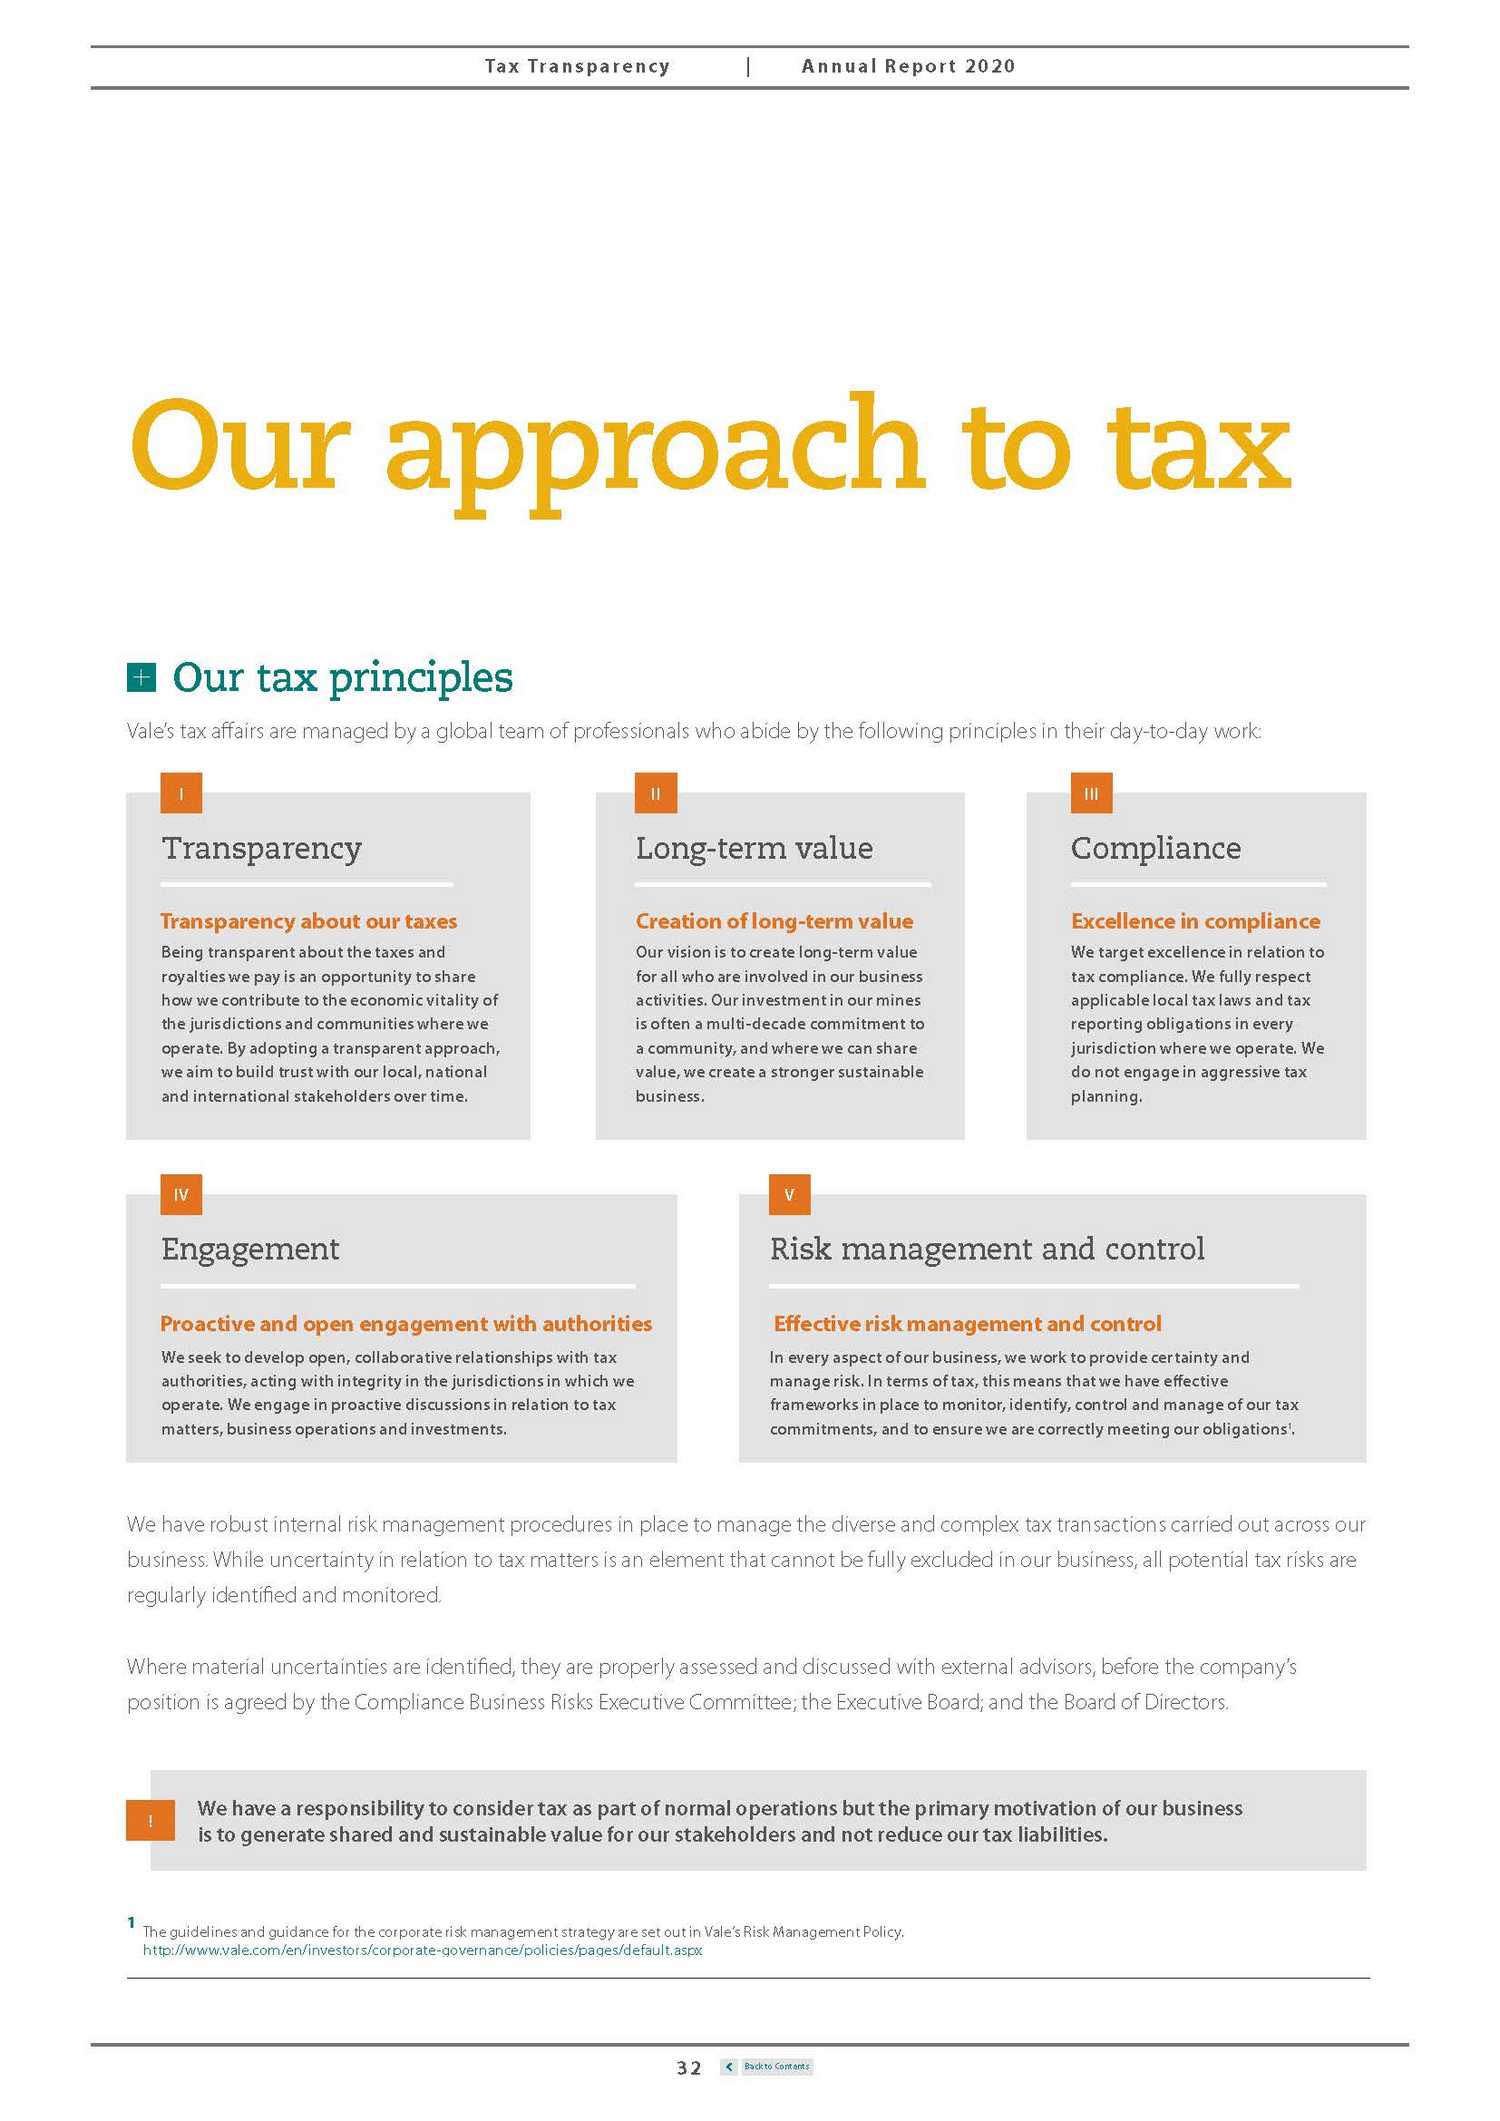 17996-1-mm_tax transparency report vale 2020_page_32.jpg